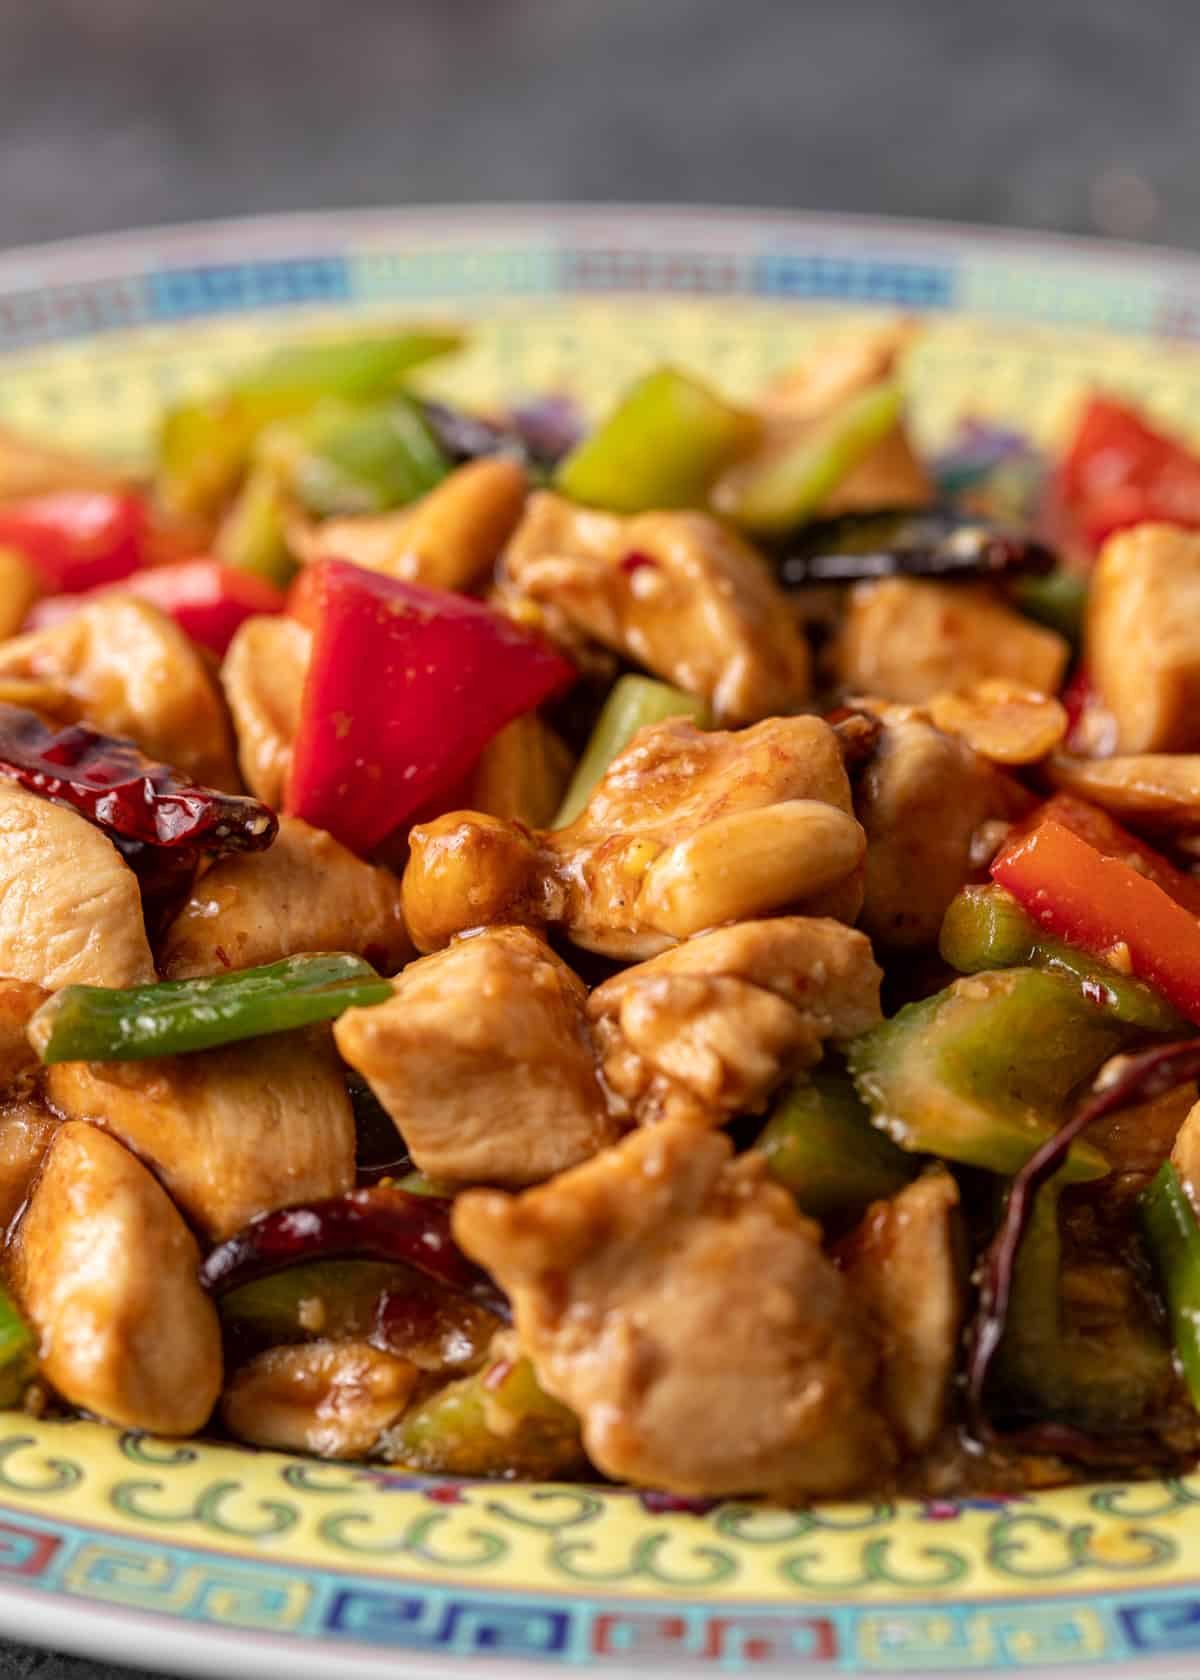 closeup: kung pao chicken recipe on a colorful ceramic plate with chicken and vegetables shown